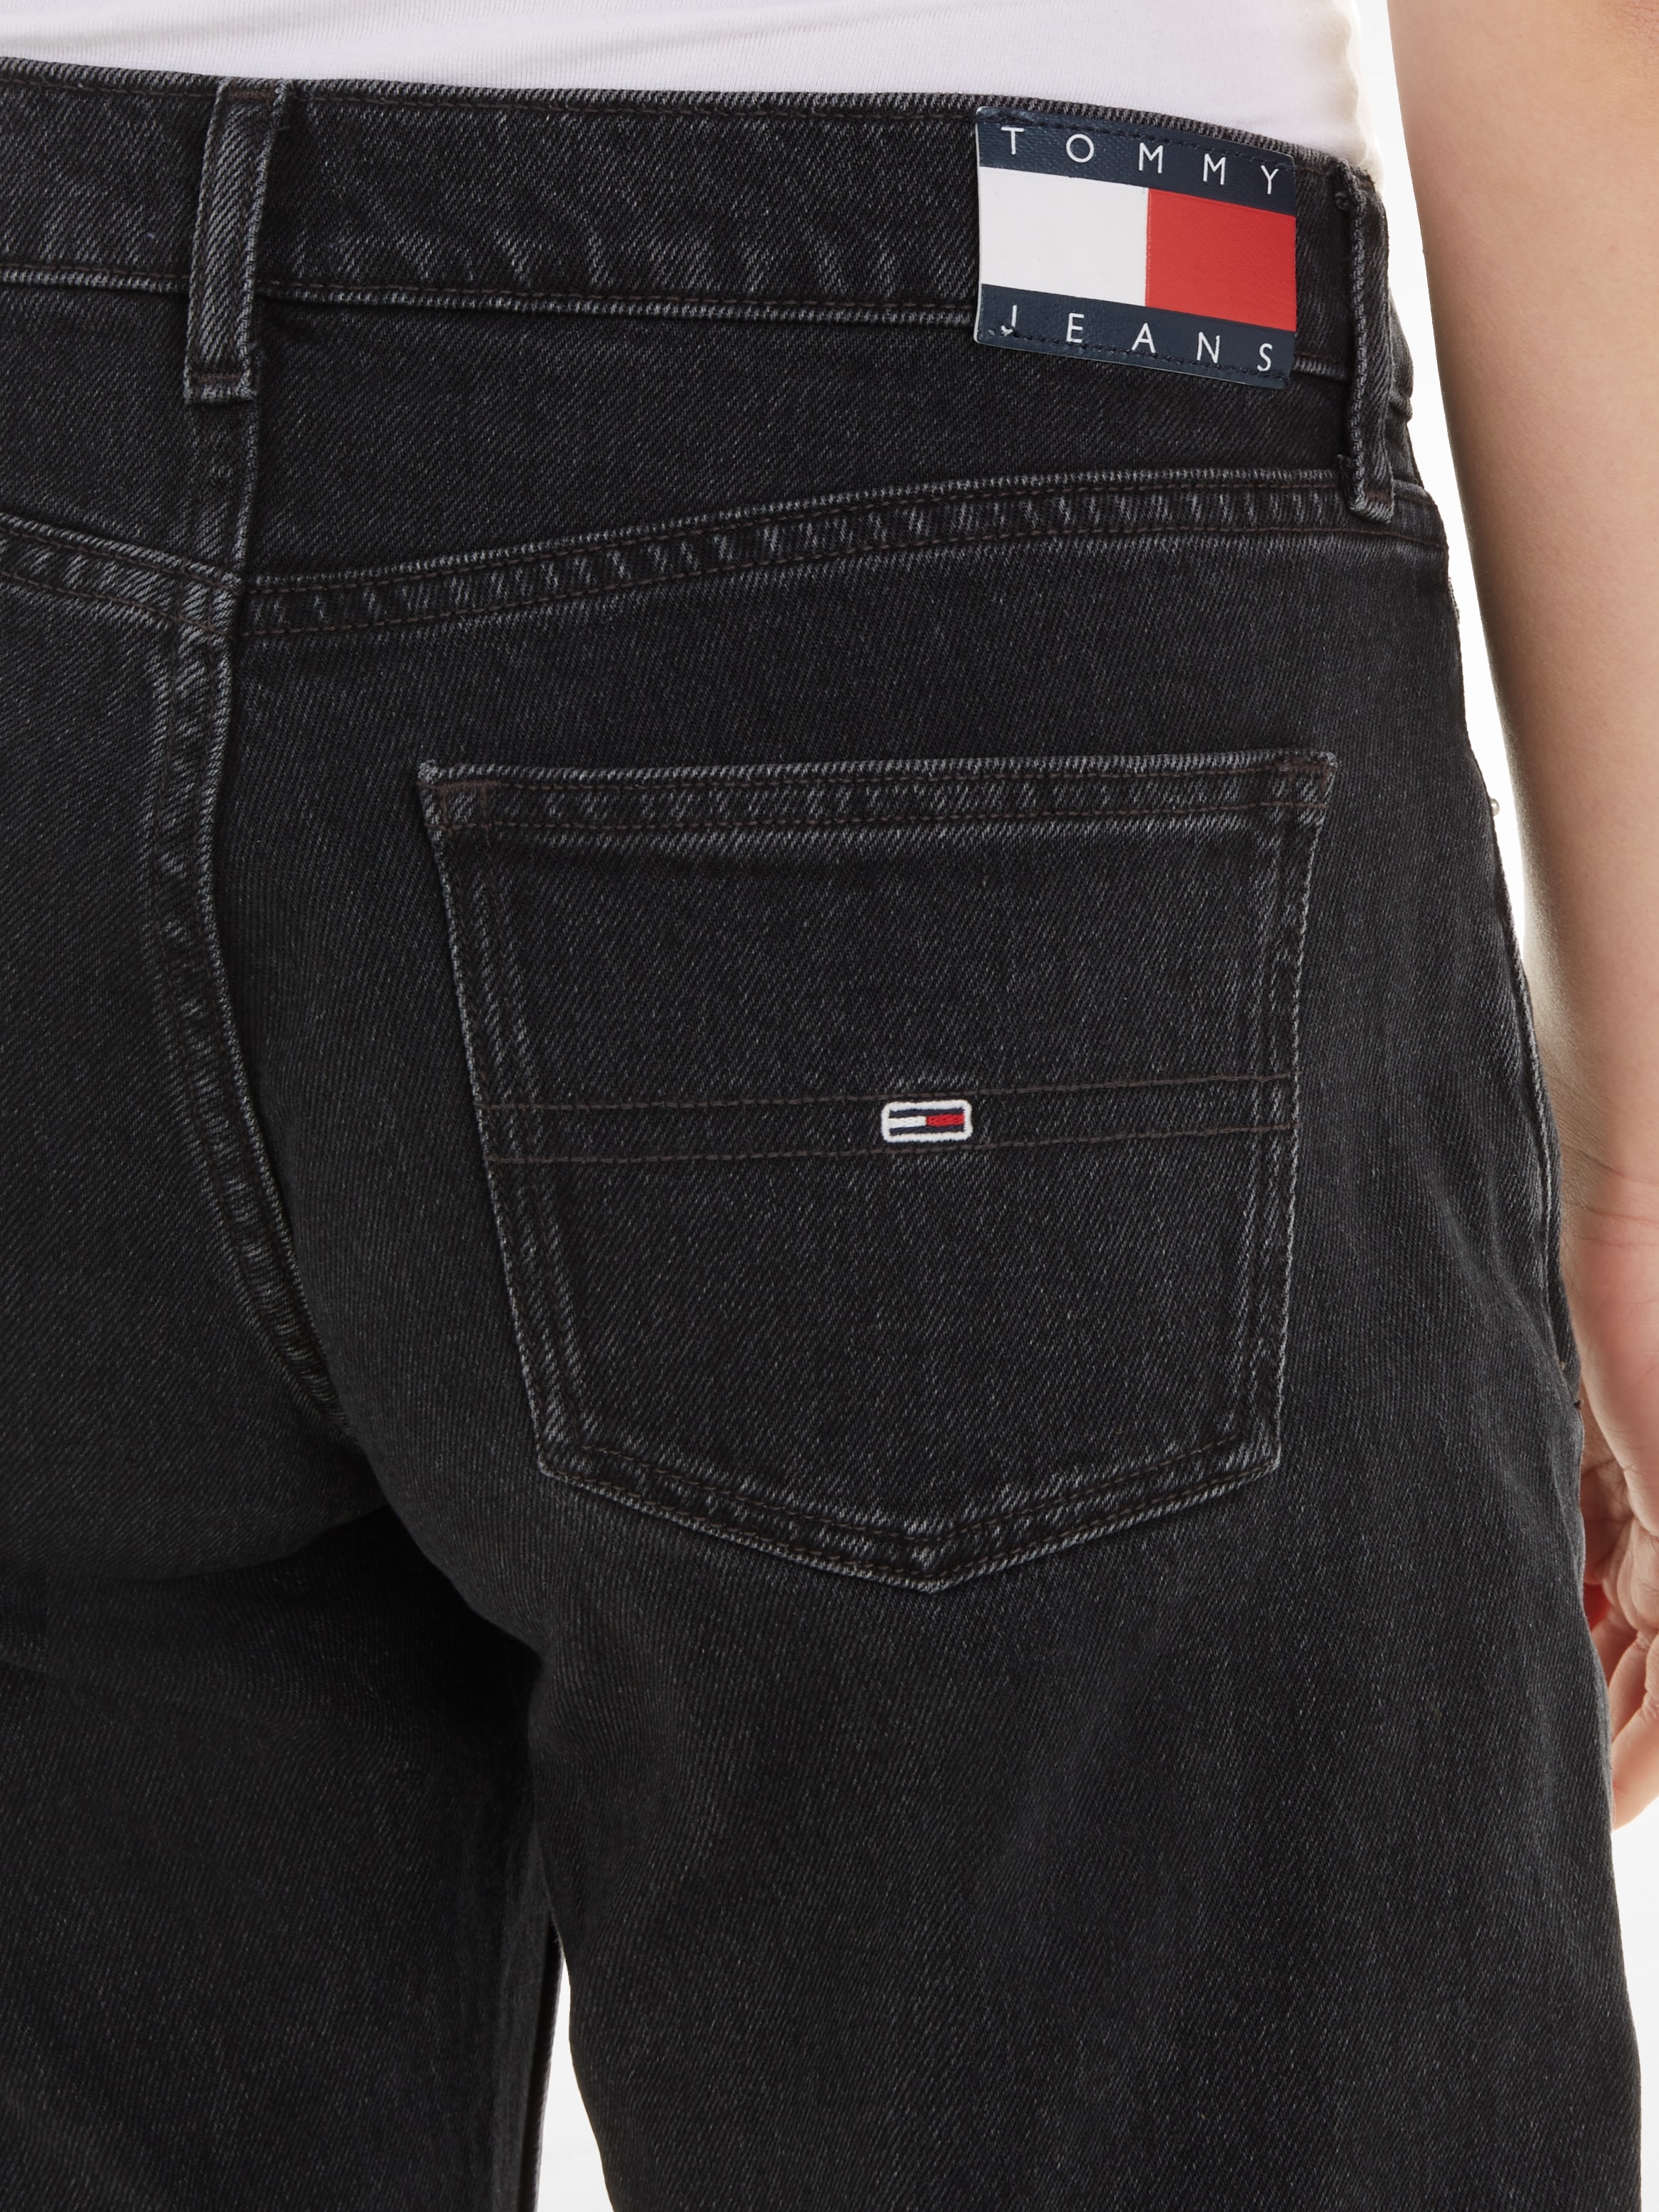 LW OTTO Jeans Flag Jeans Straight-Jeans Tommy bei mit STR »SOPHIE Logo-Badge BH4116«, online Tommy &